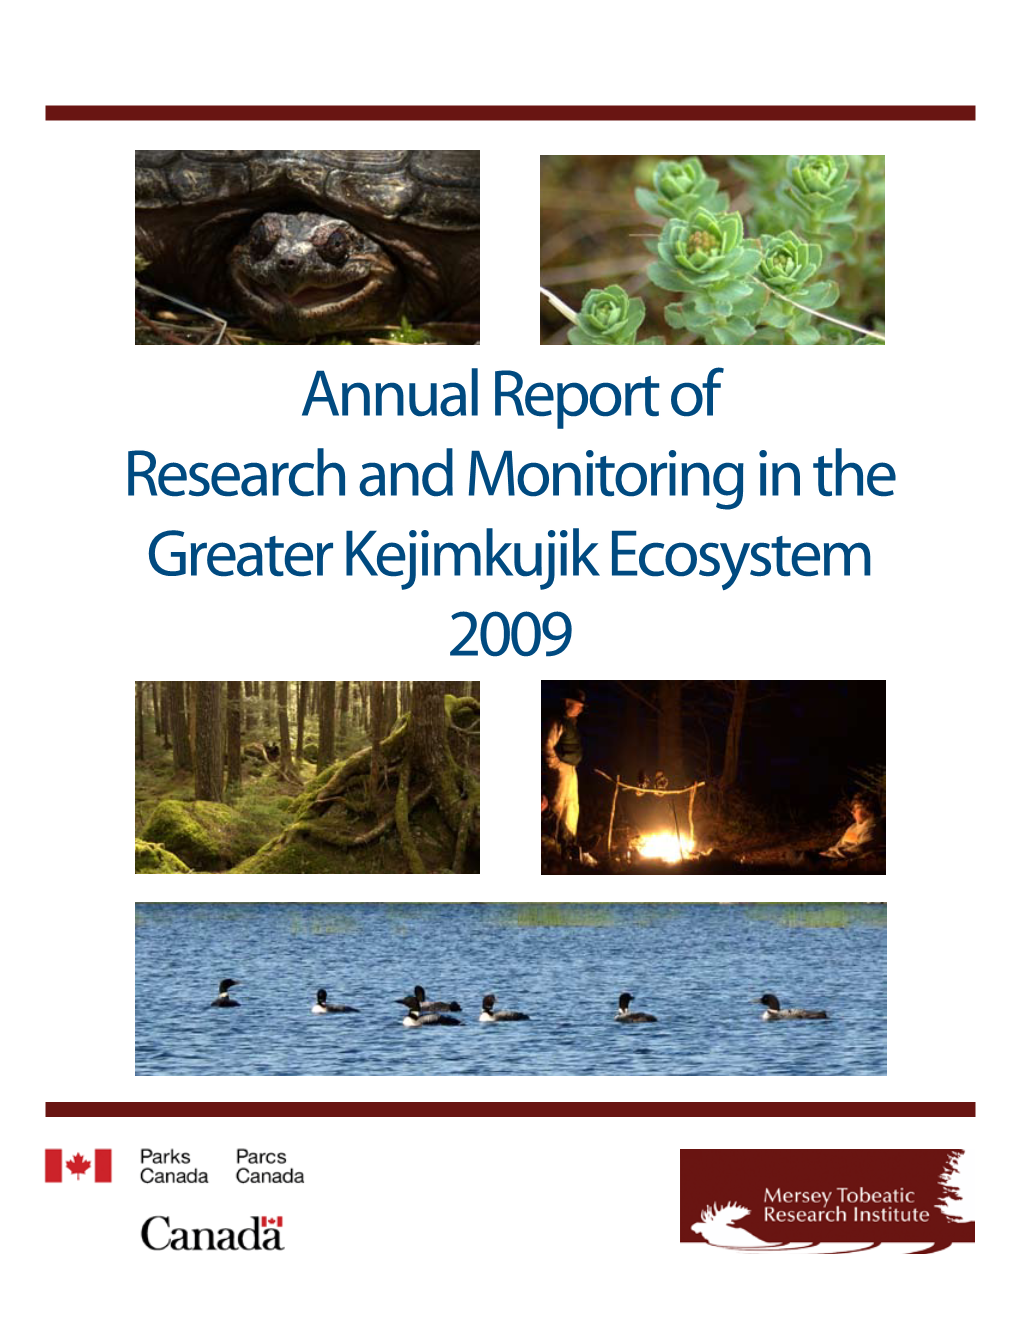 Annual Report of Research and Monitoring in the Greater Kejimkujik Ecosystem 2009 Citation: Mersey Tobeatic Research Institute and Parks Canada